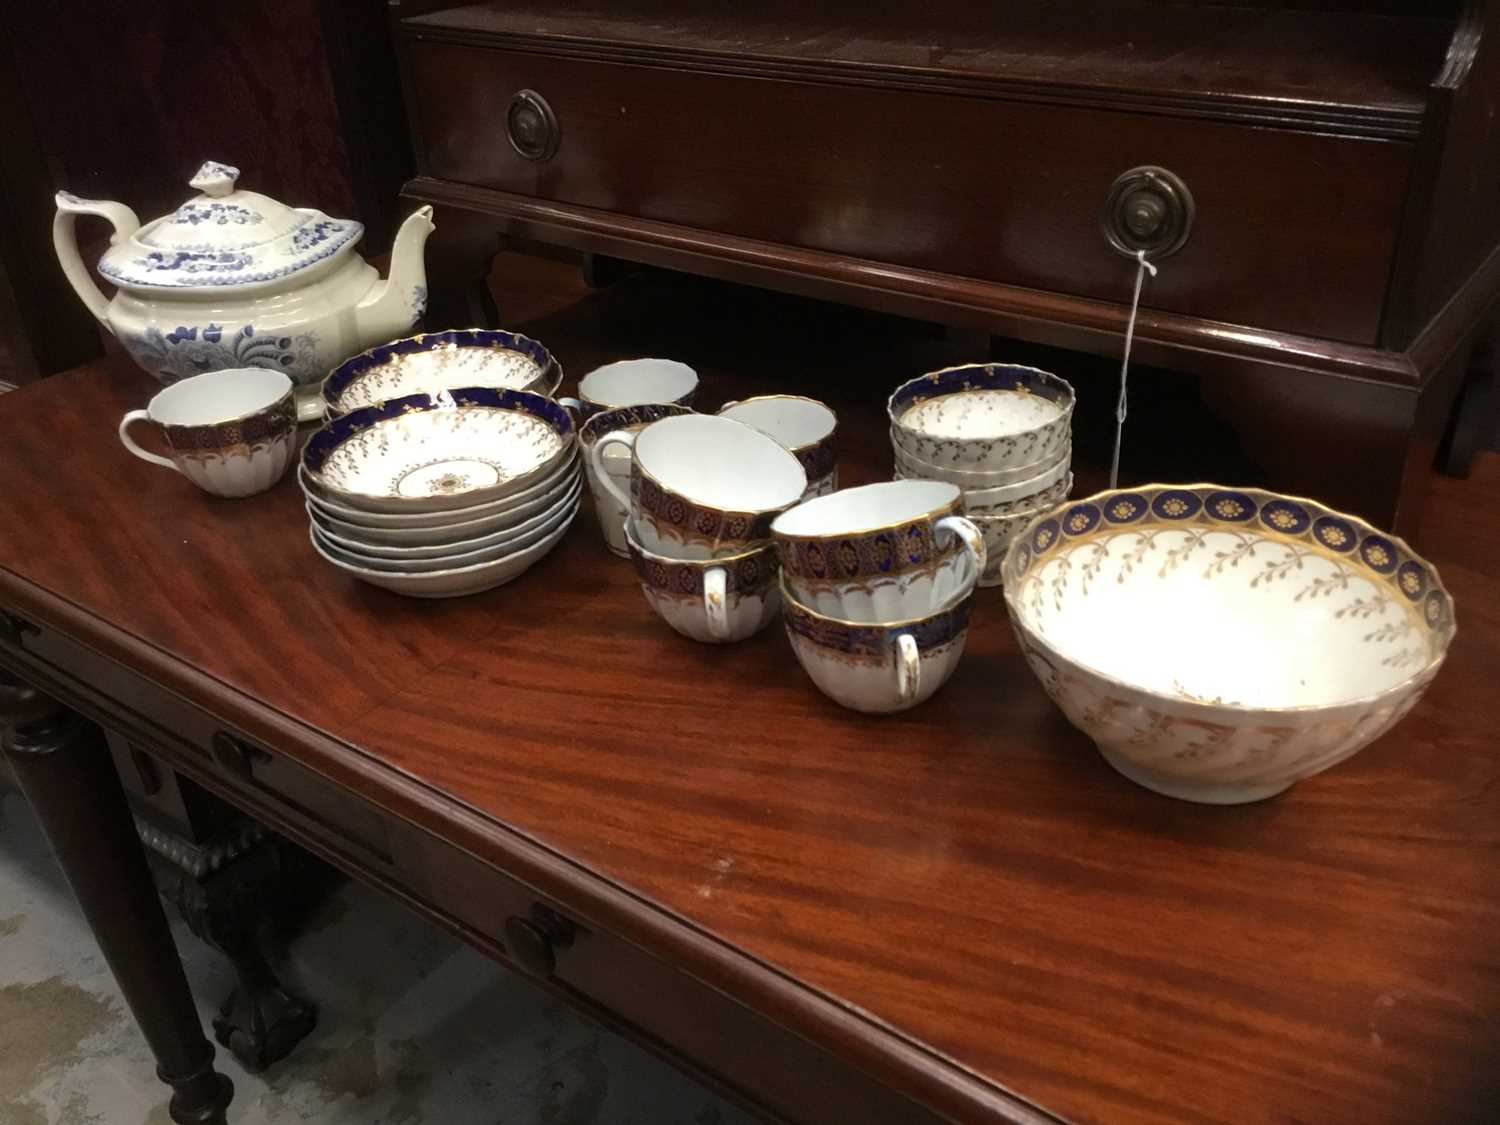 Collection of late 18th / early 19th century Worcester porcelain teawares